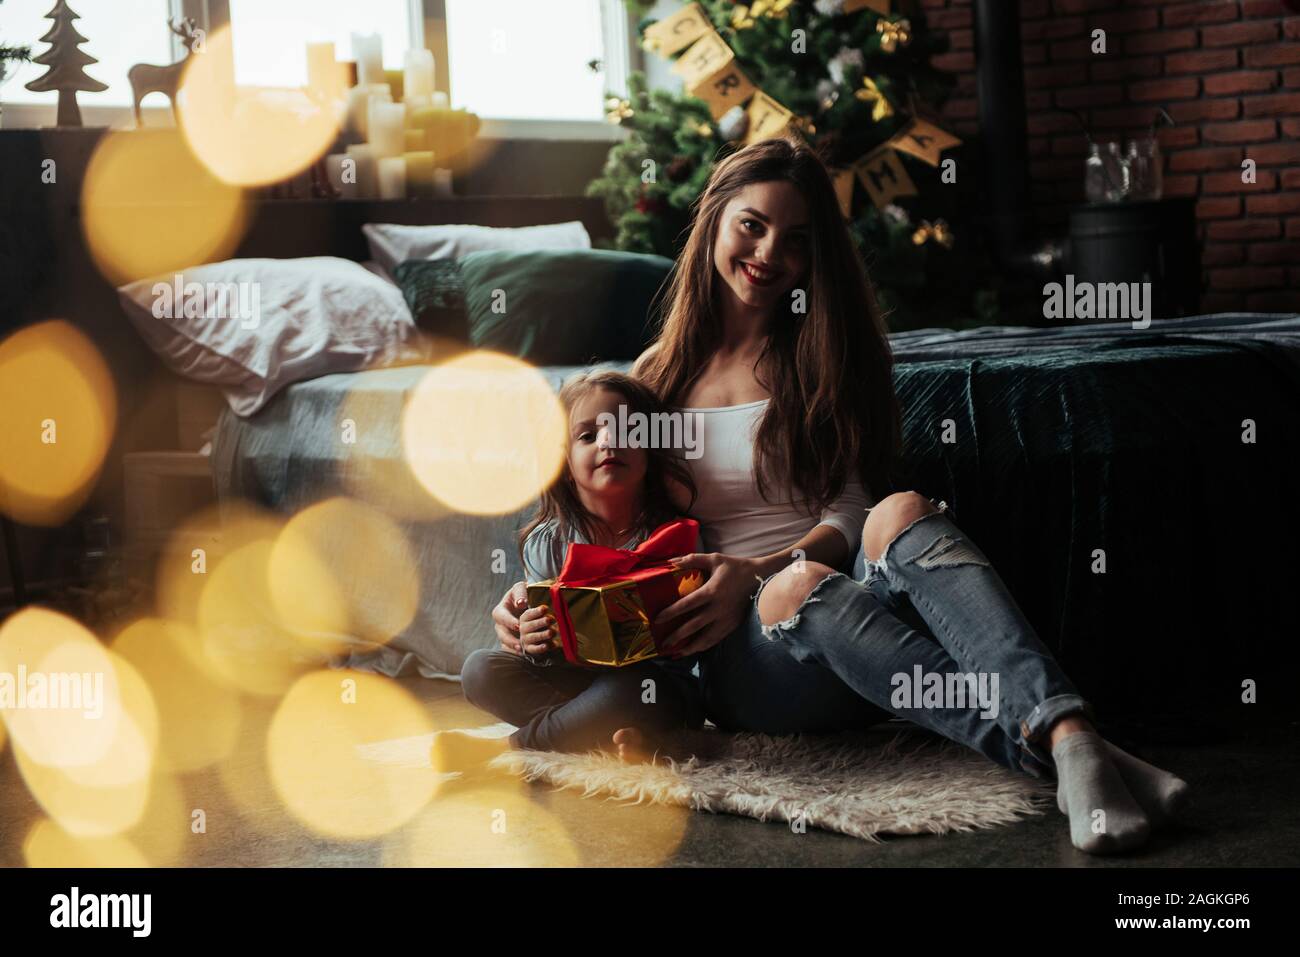 Nice portrait. Mother and daughter sits in holiday decorated room and holds gift box Stock Photo